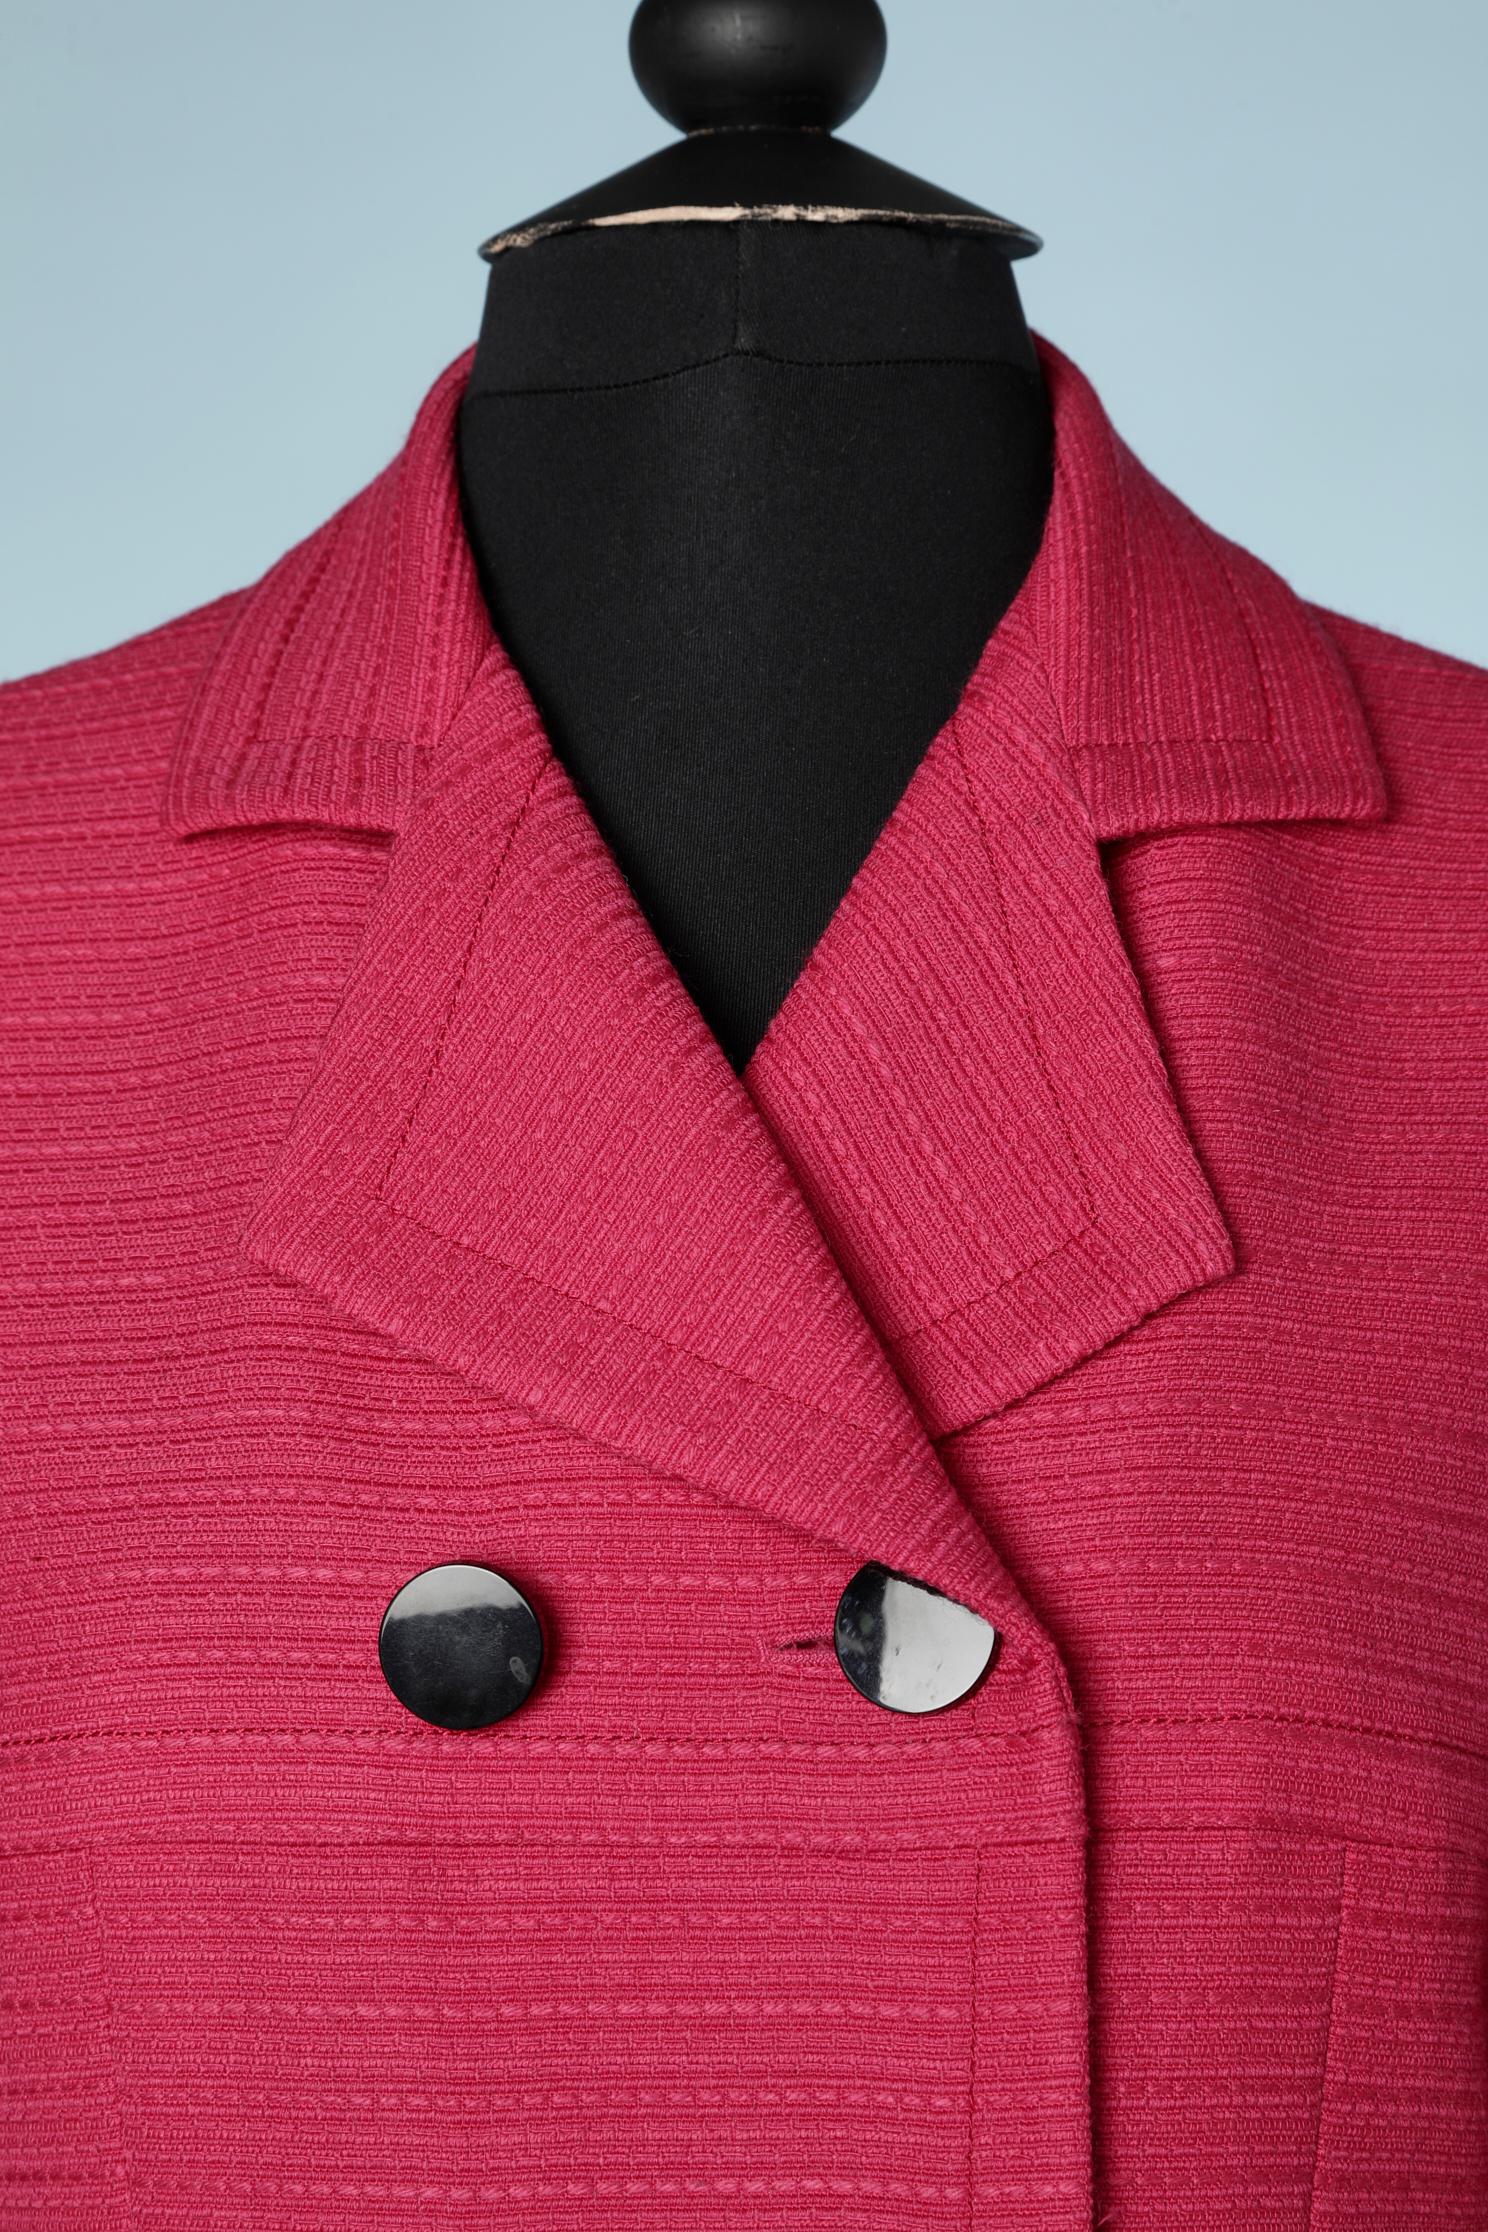 Pink wool and black buttons skirt-suit.
SIZE 38 (M) 